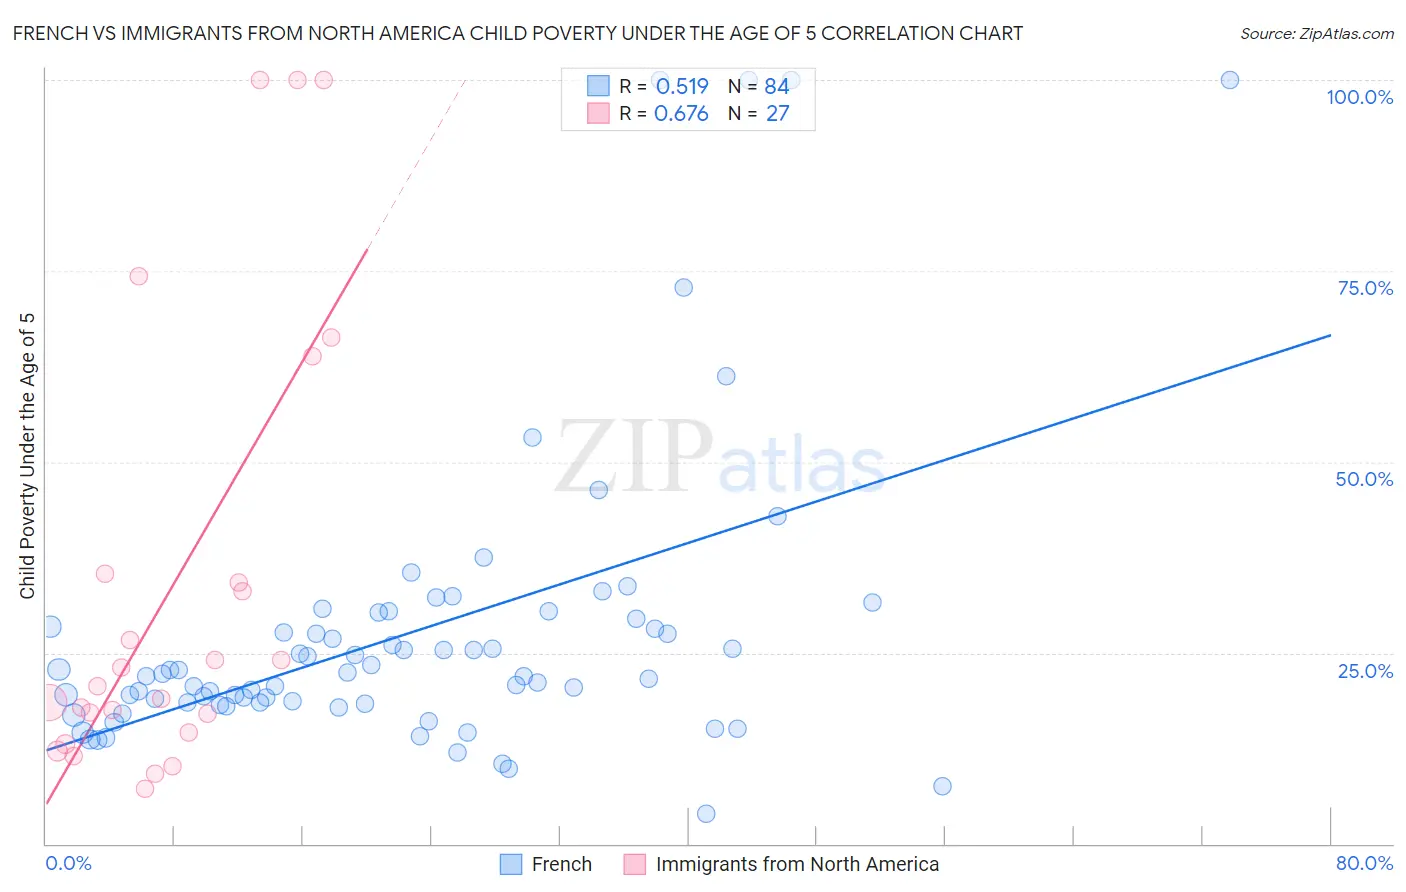 French vs Immigrants from North America Child Poverty Under the Age of 5